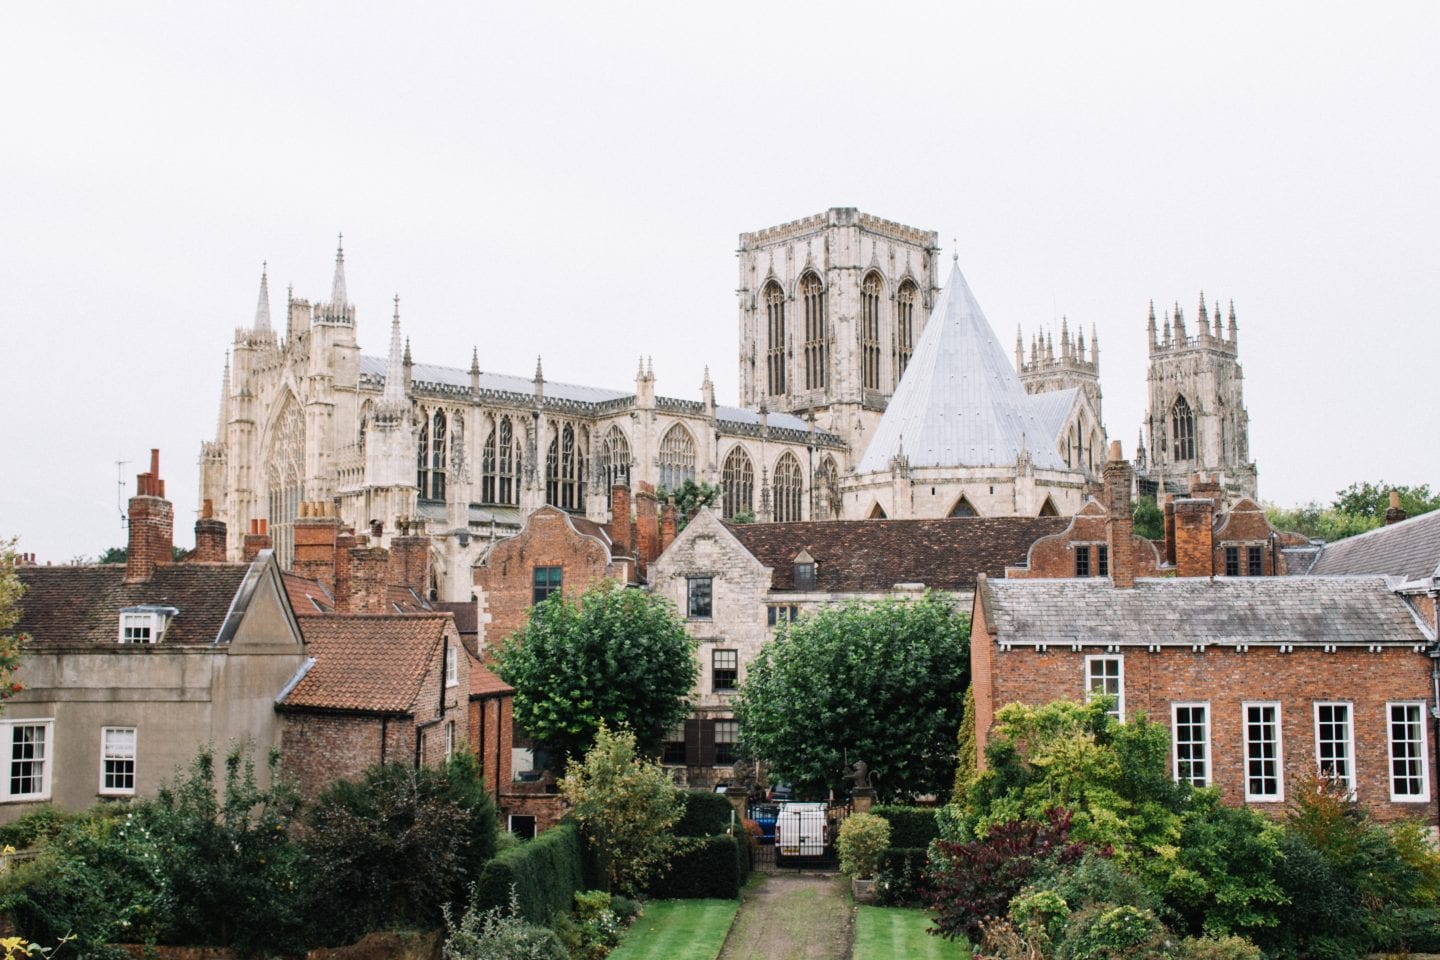 best things to do in York